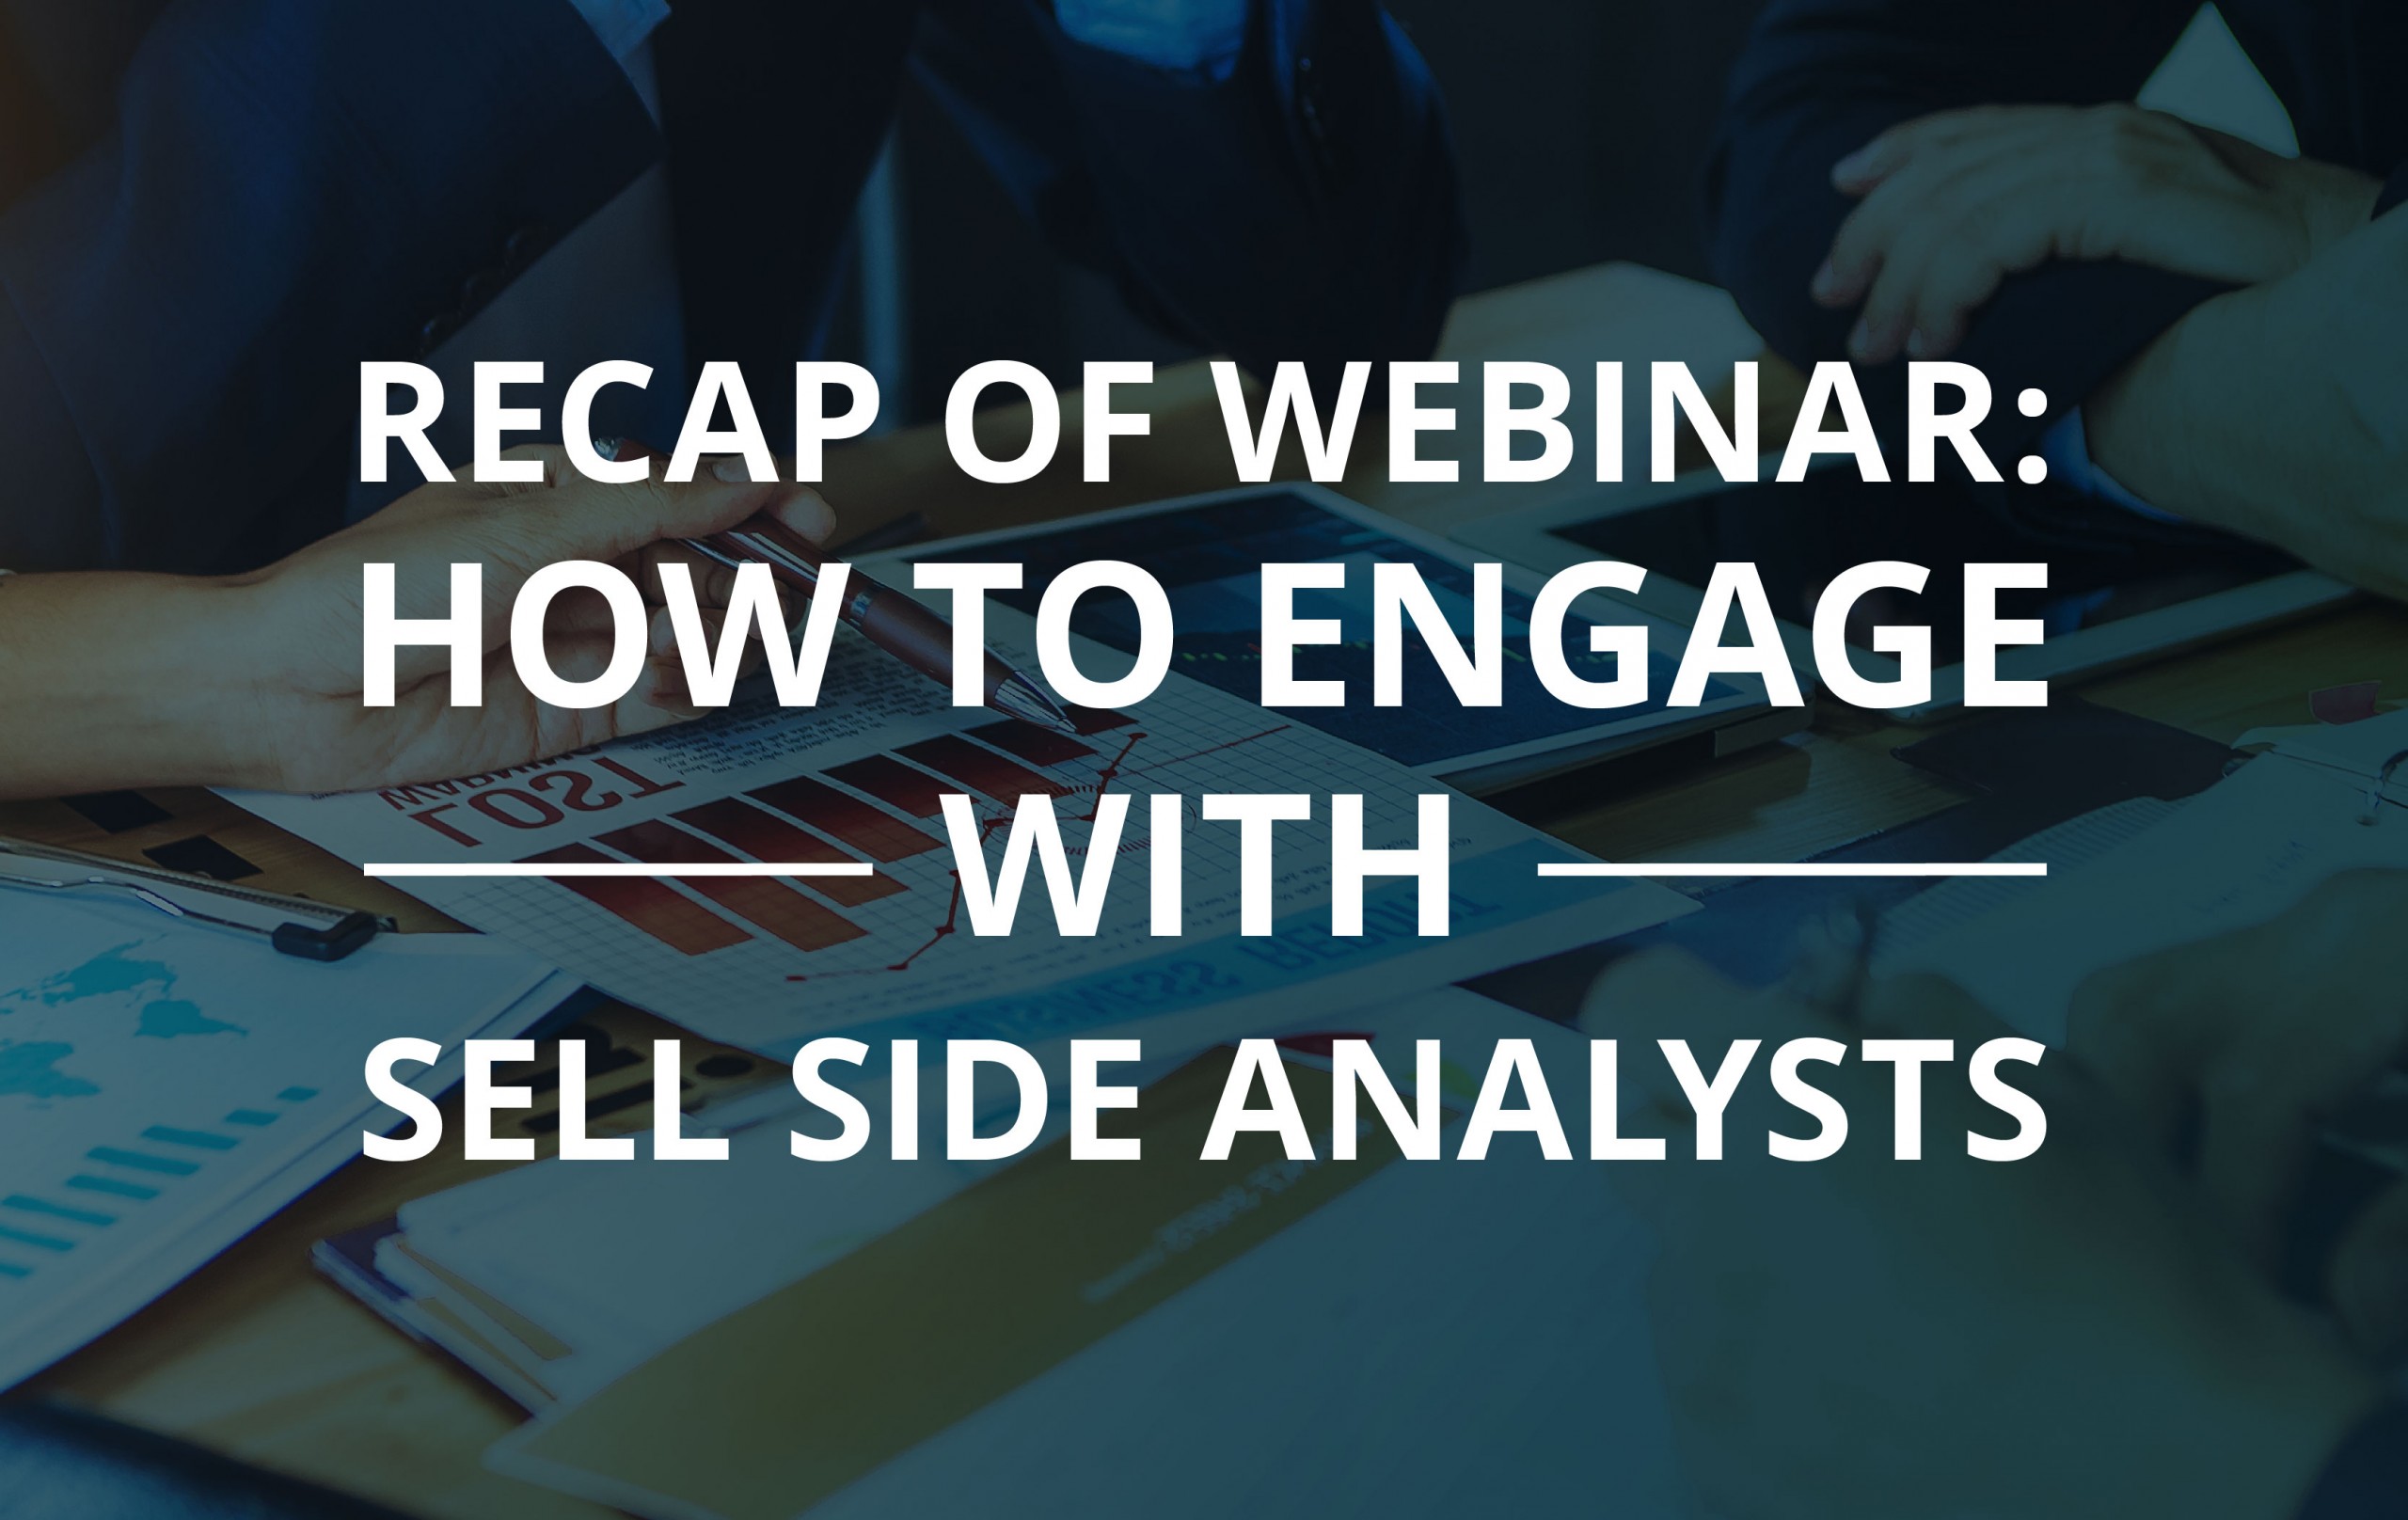 image for Recap of Webinar: “How to Engage with Sell Side Analysts”